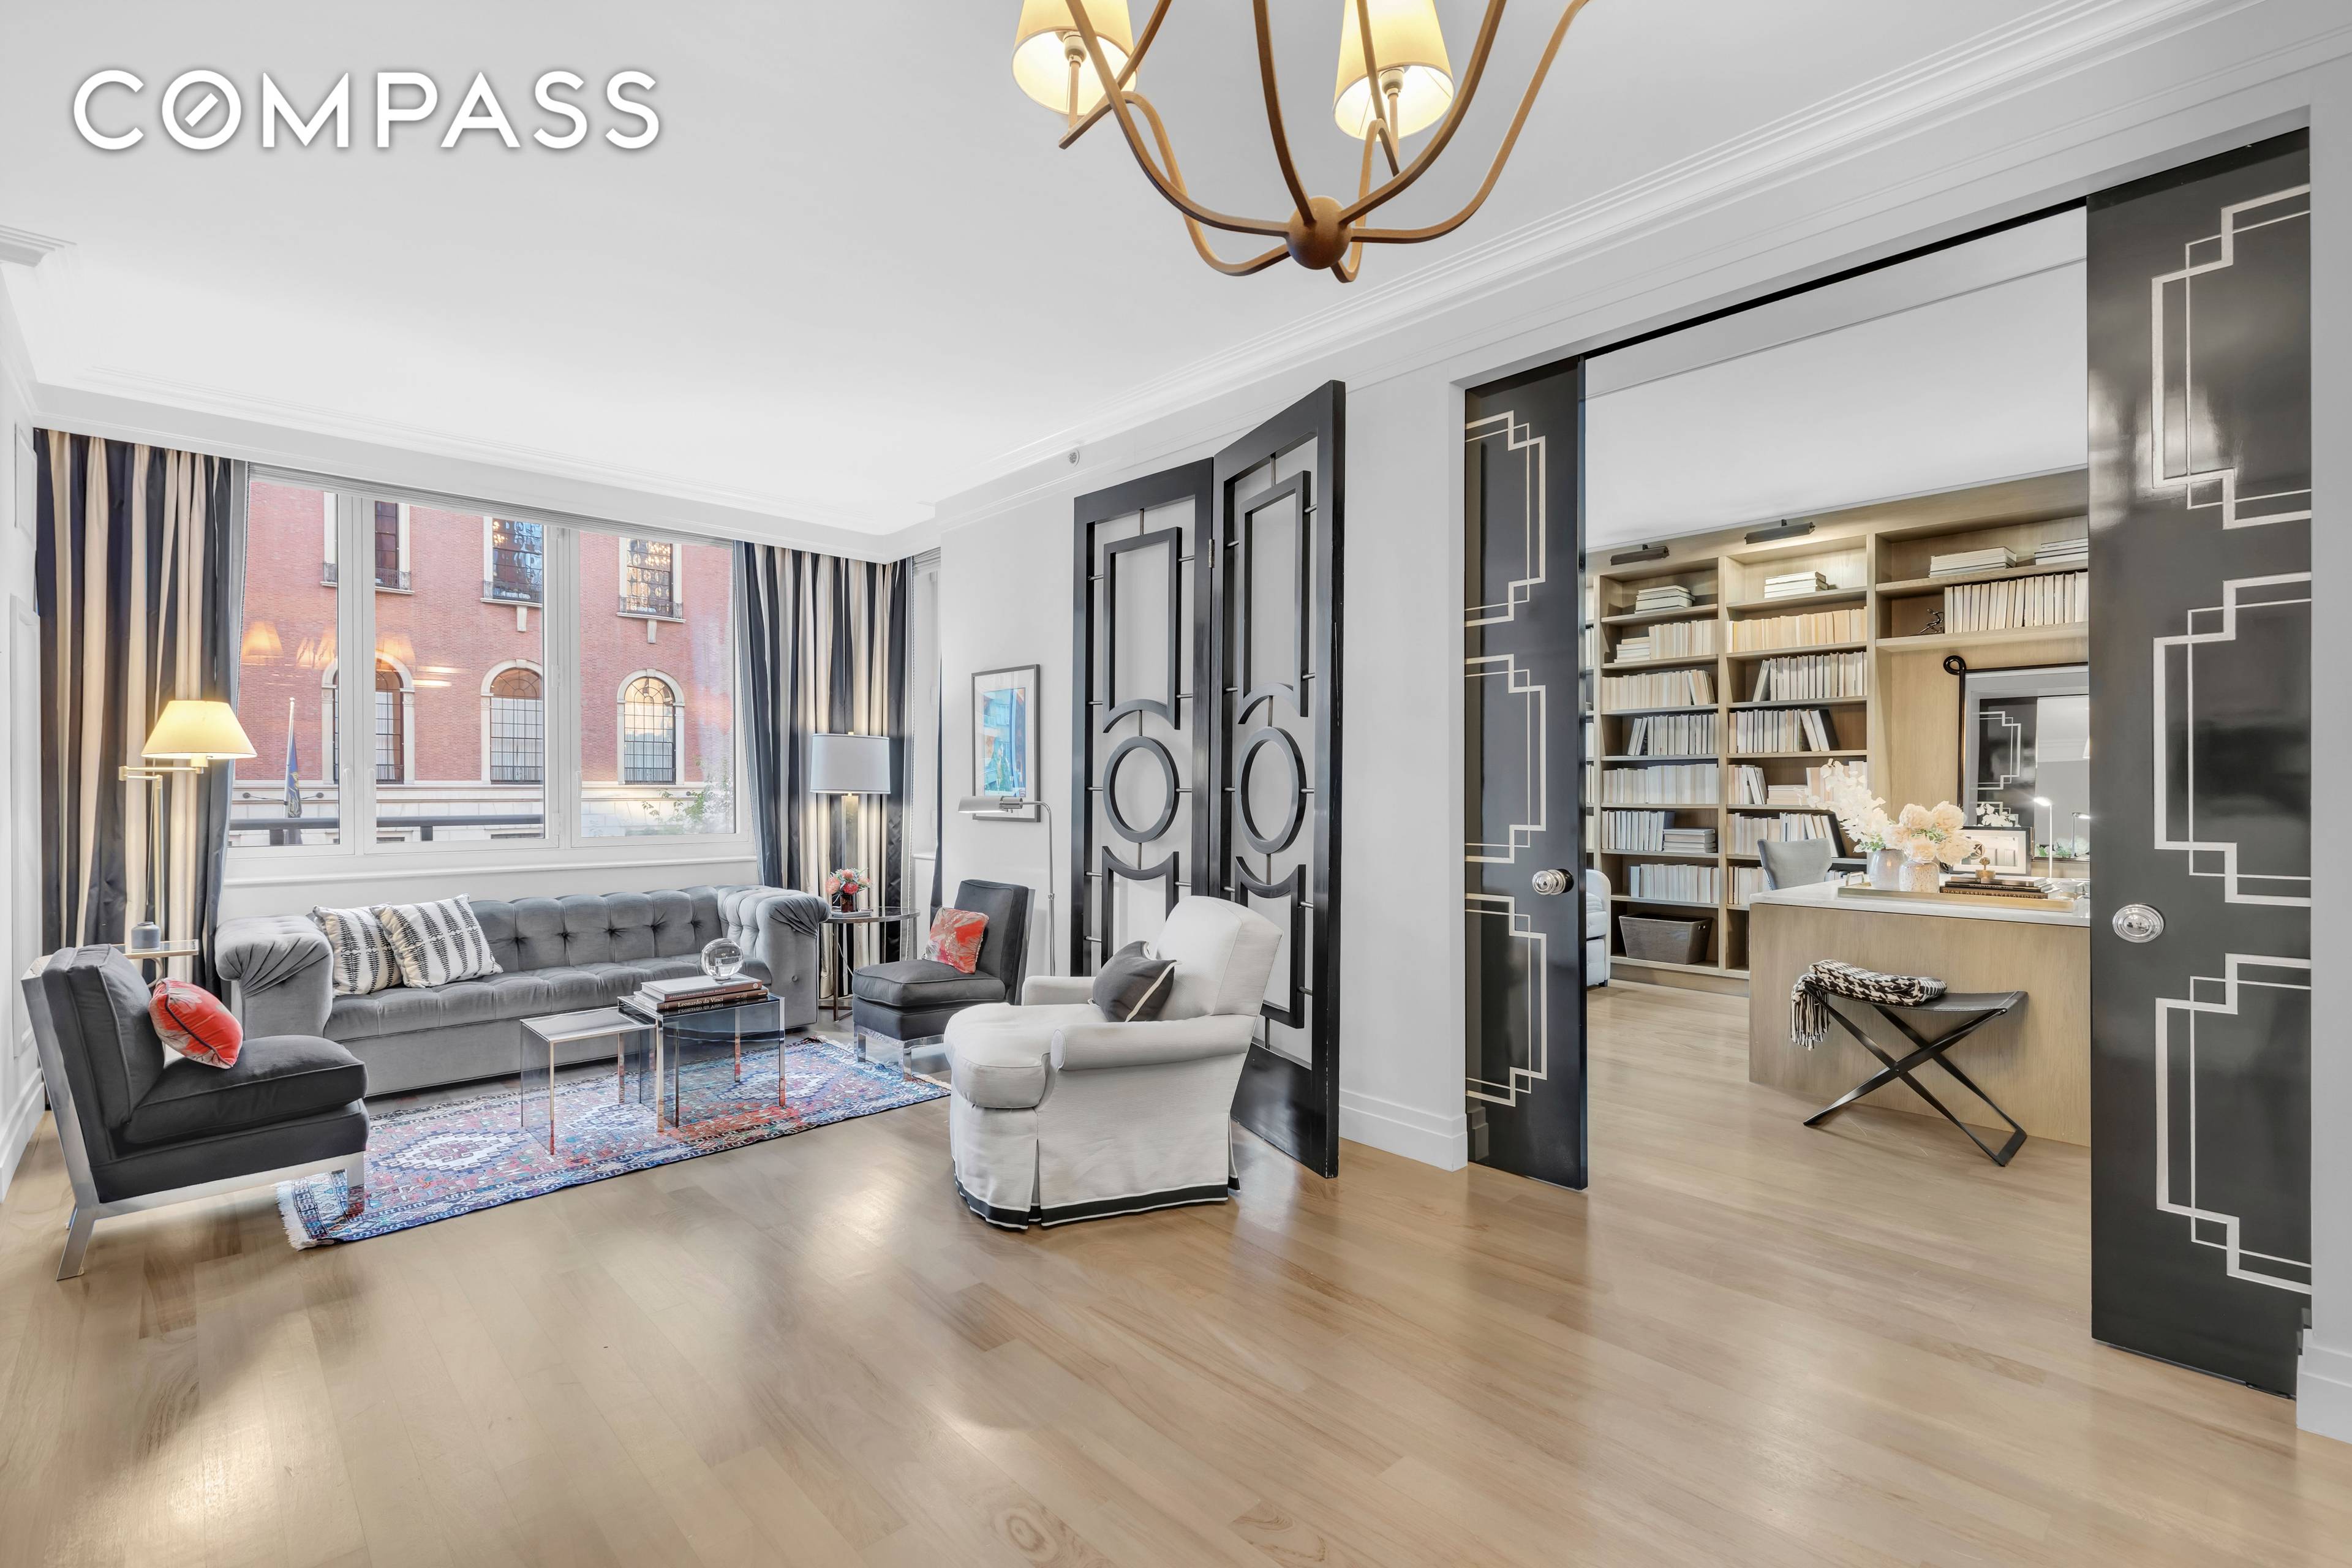 Welcome home to Manhattan's most thoughtfully renovated and custom designed home, masterly implemented to support all of the luxuries and conveniences for New York City life.